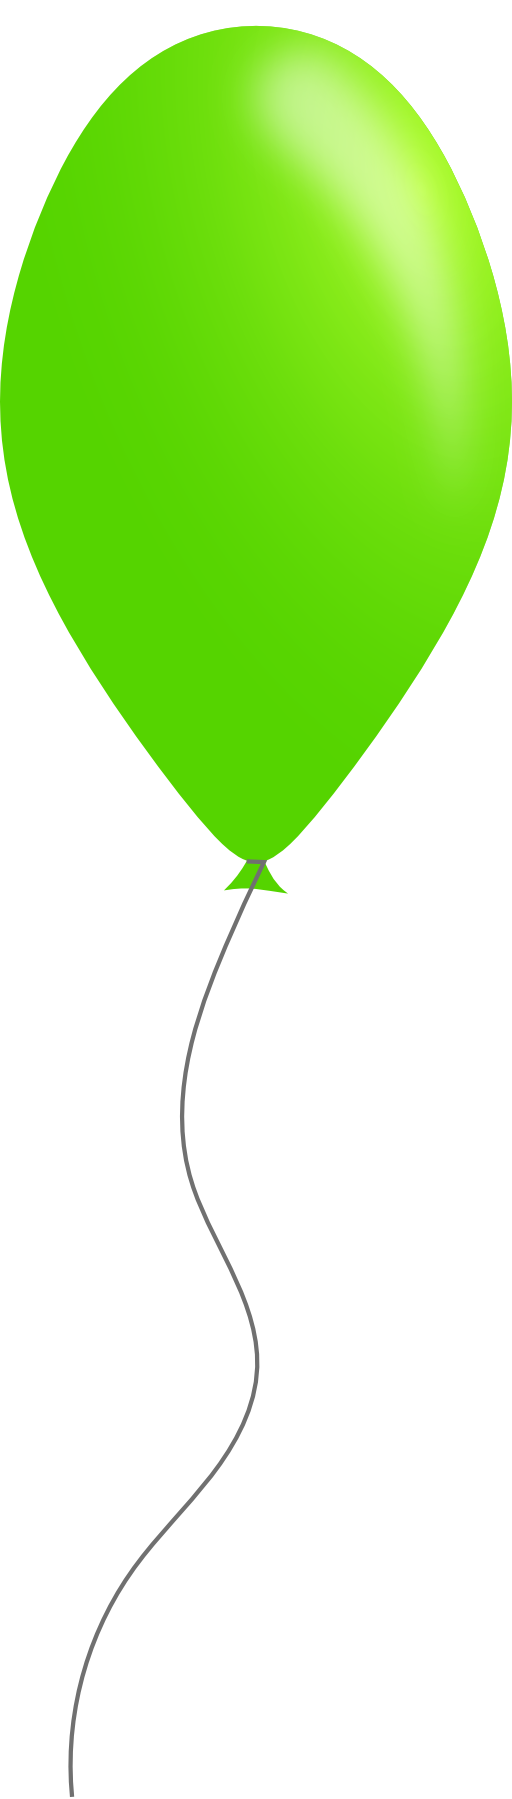 Green Balloon Clipart | Clipart Panda - Free Clipart Images